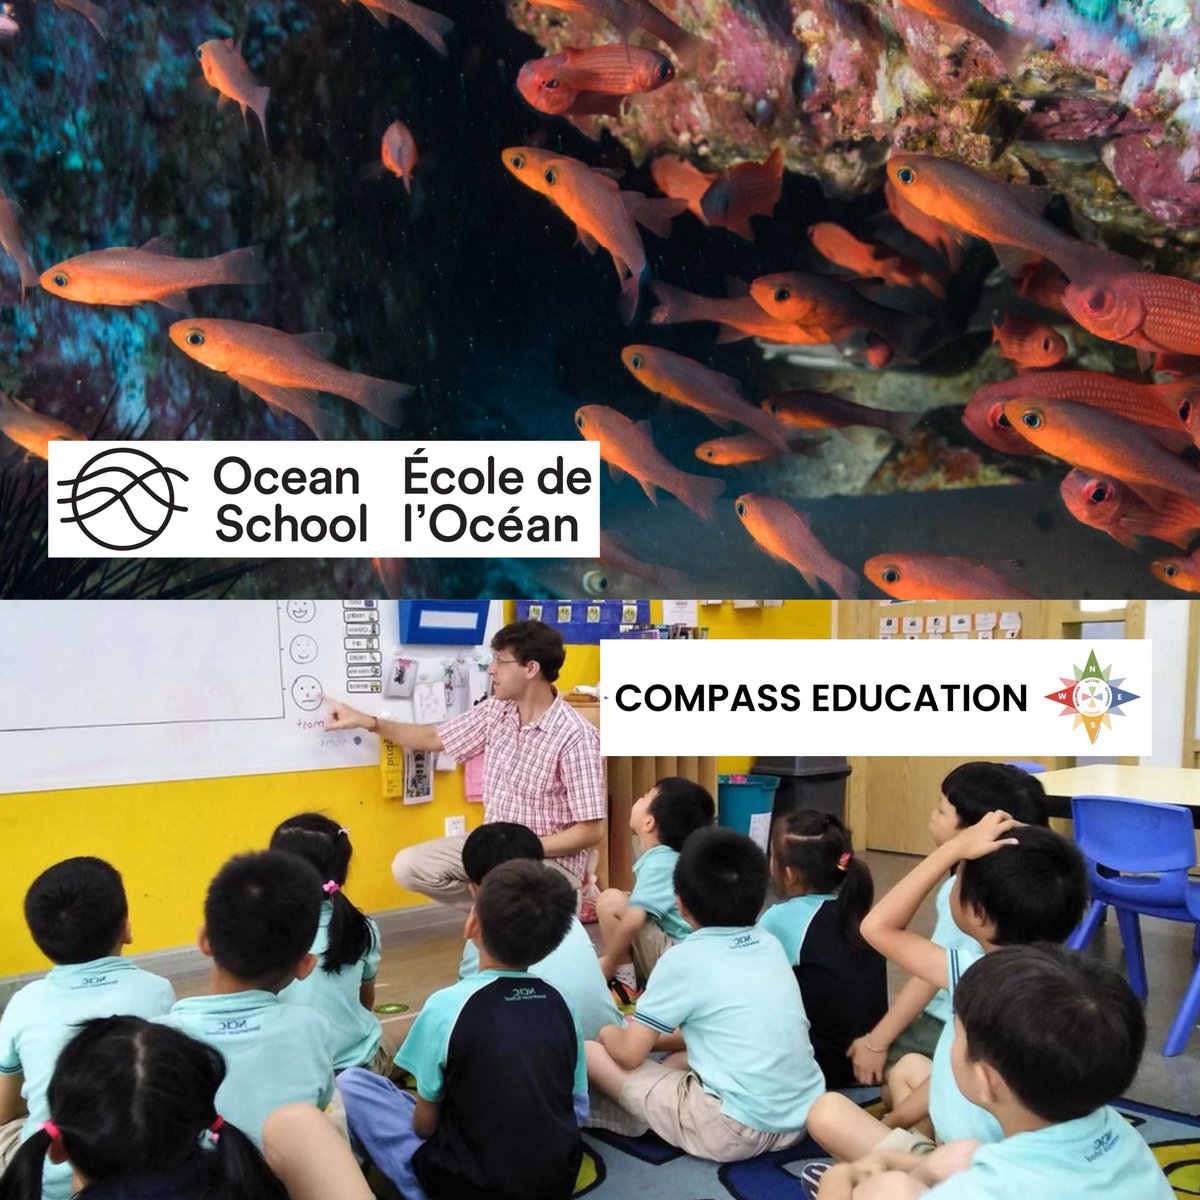 Thrilled to announce the new partnership between Compass Education and Ocean School! Empowering educators with sustainability & systems thinking tools. Get ready for innovative approaches shaping education! @OceanSchoolNow #CompassEducation #OceanSchool #Sustainability #Education